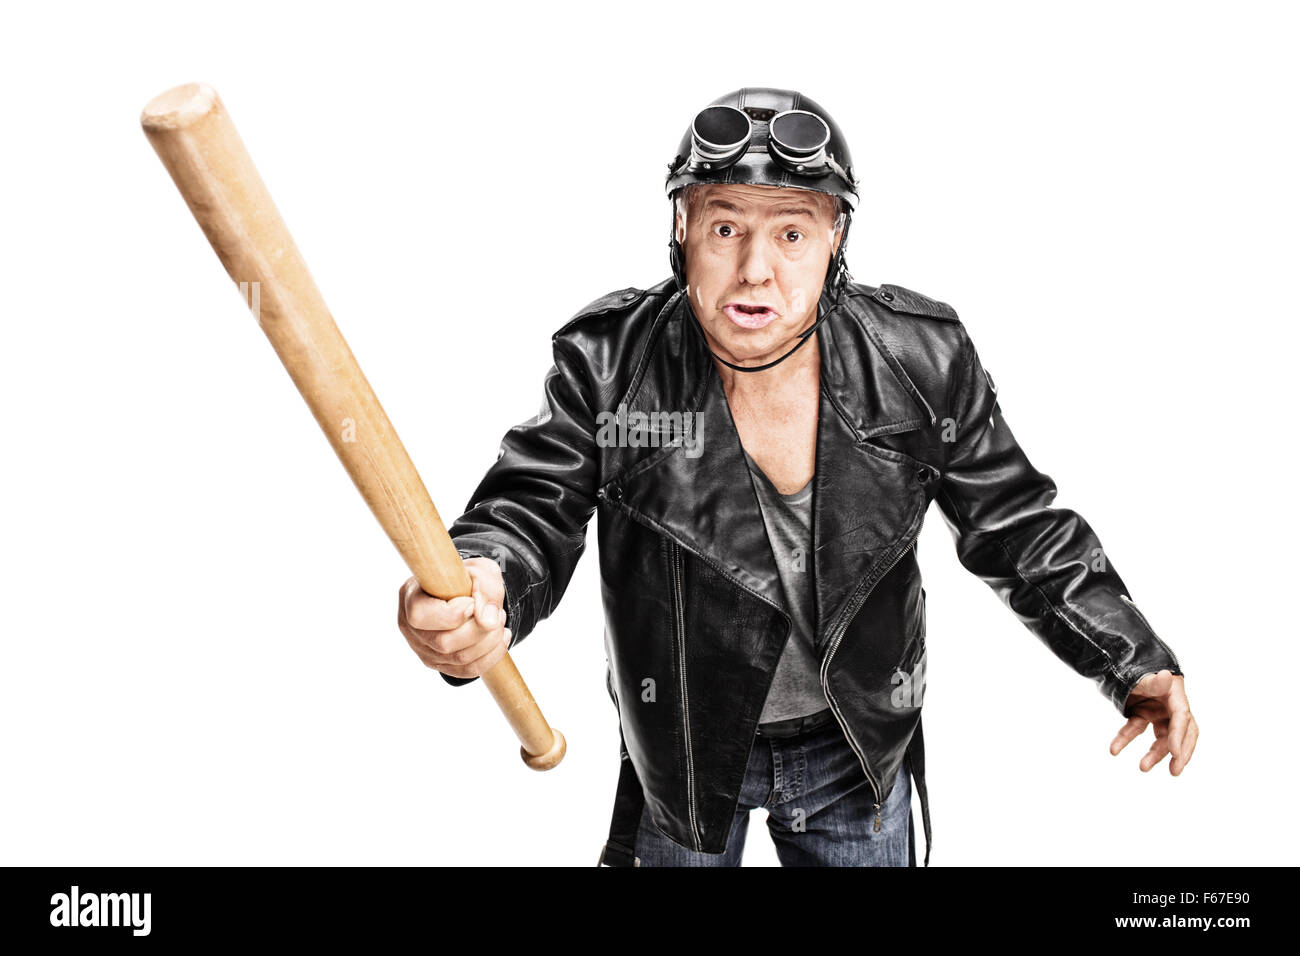 Angry and violent senior biker swinging with a baseball bat isolated on white background Stock Photo